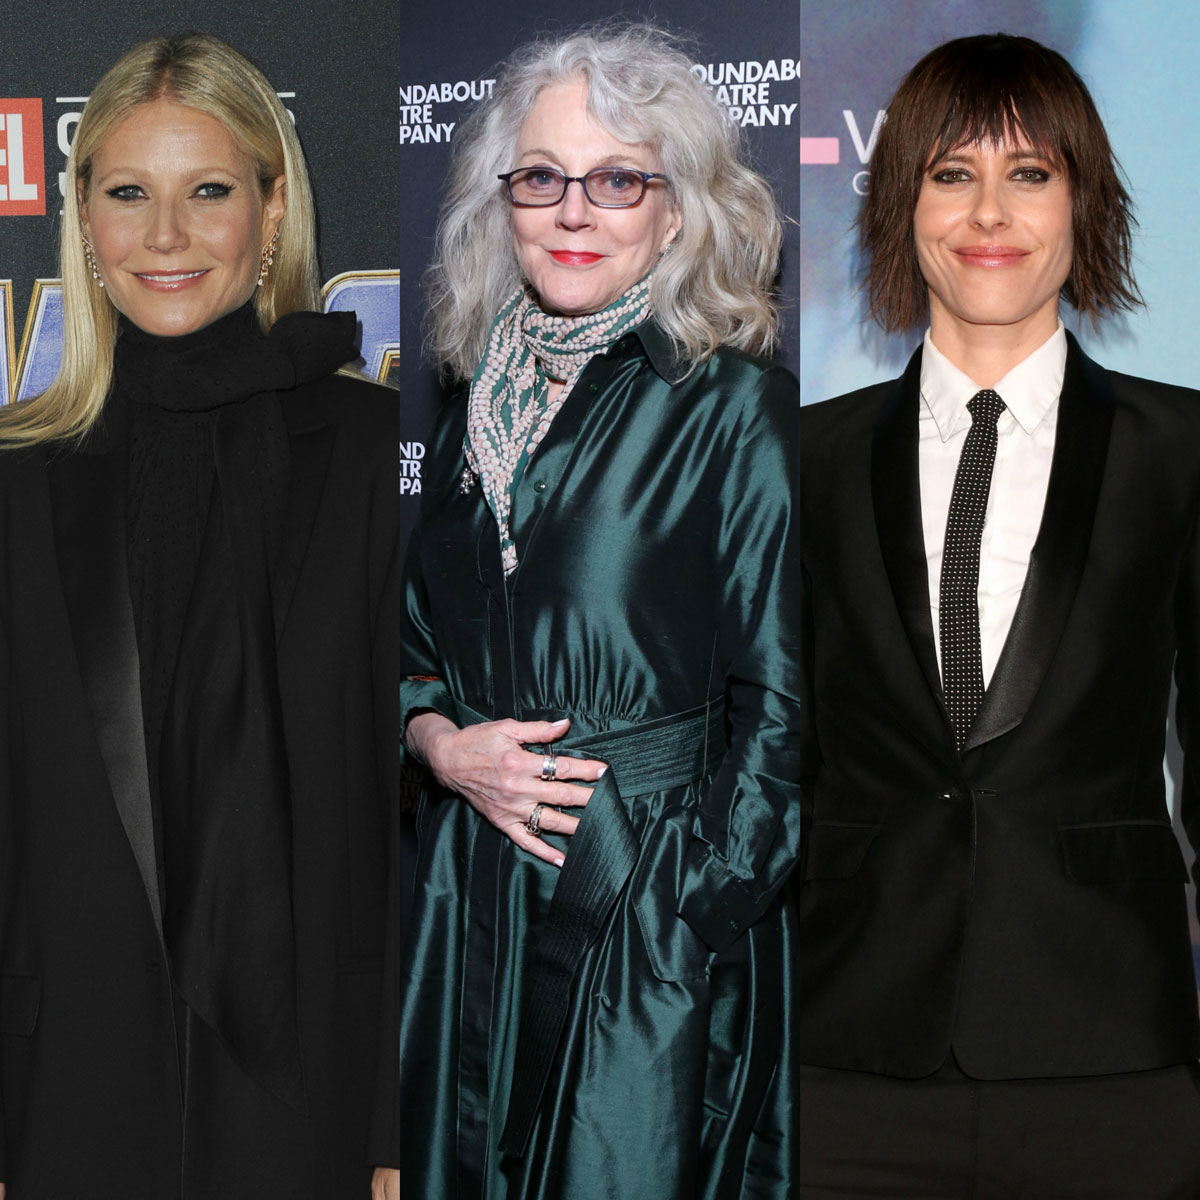 Gwyneth paltrow, Blythe Danner, and Katherine Moennig are related